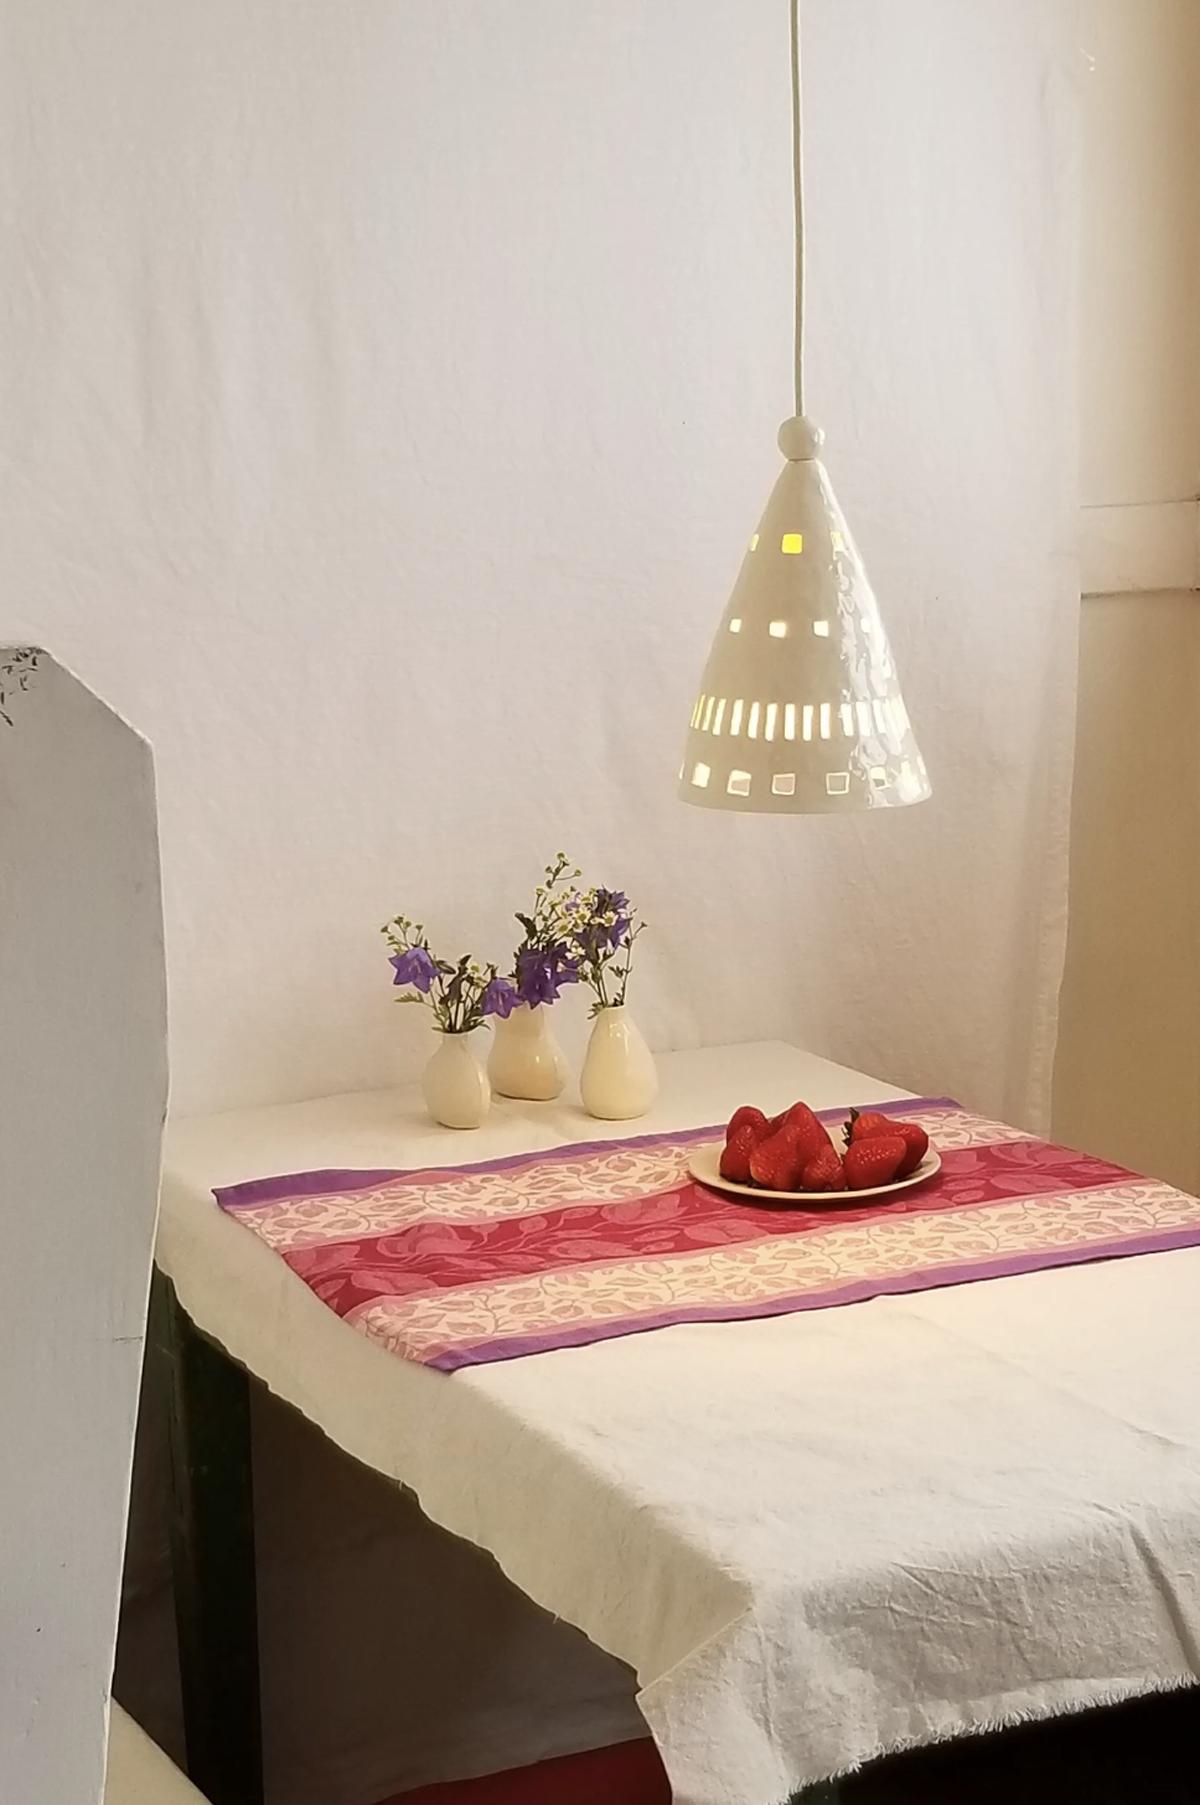 Ceramic pendant light hanging over a table